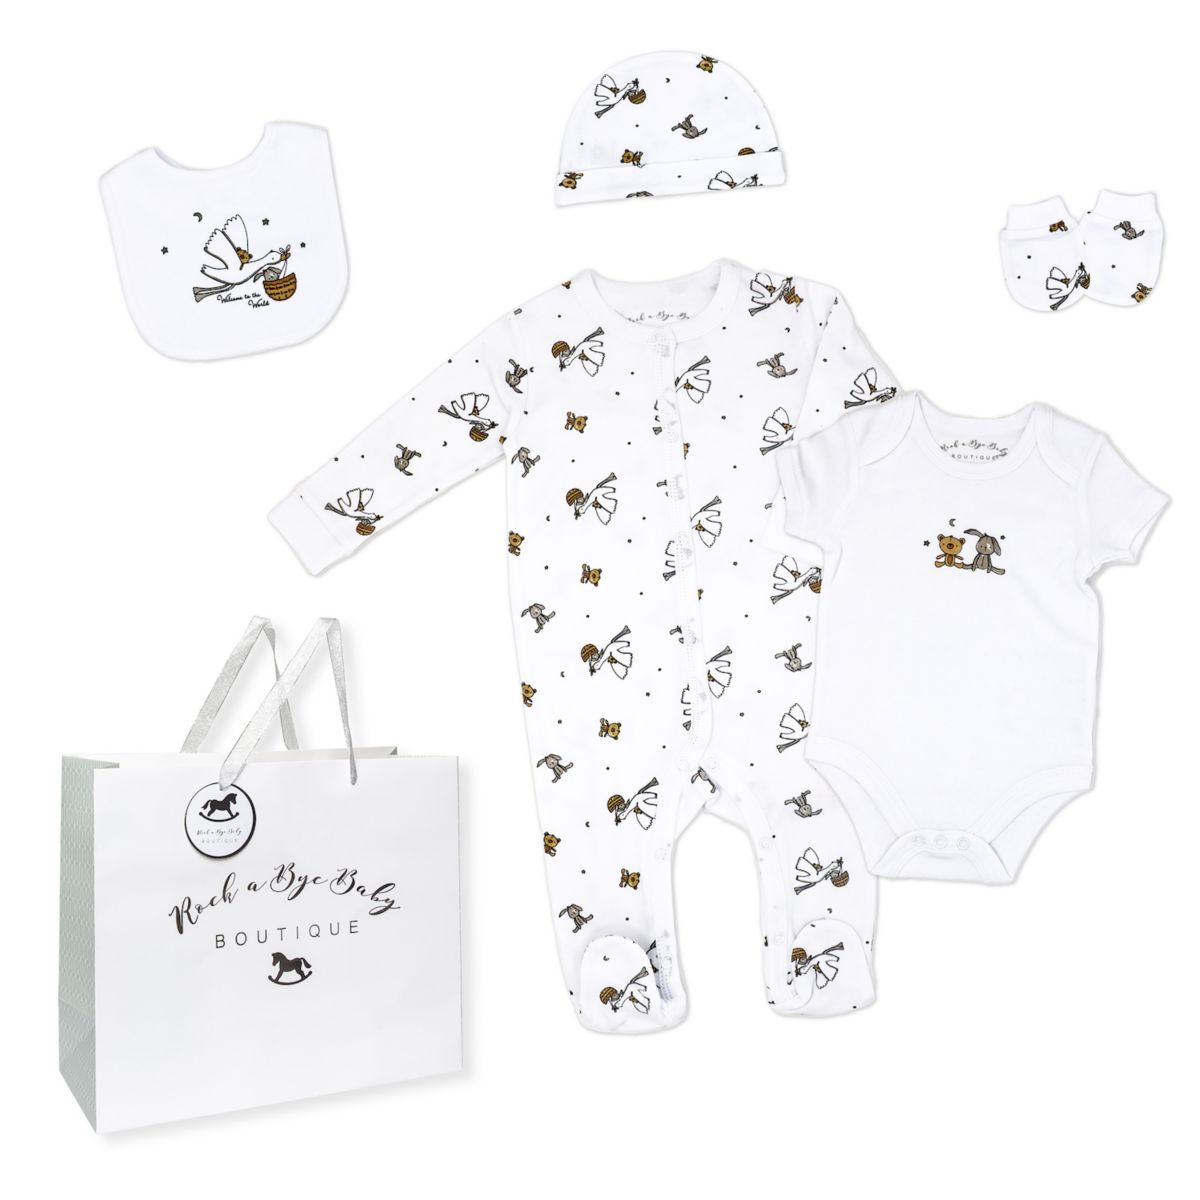 Baby Boys and Girls Busy Stork Layette, 5 Piece Set Rock A Bye Baby Boutique